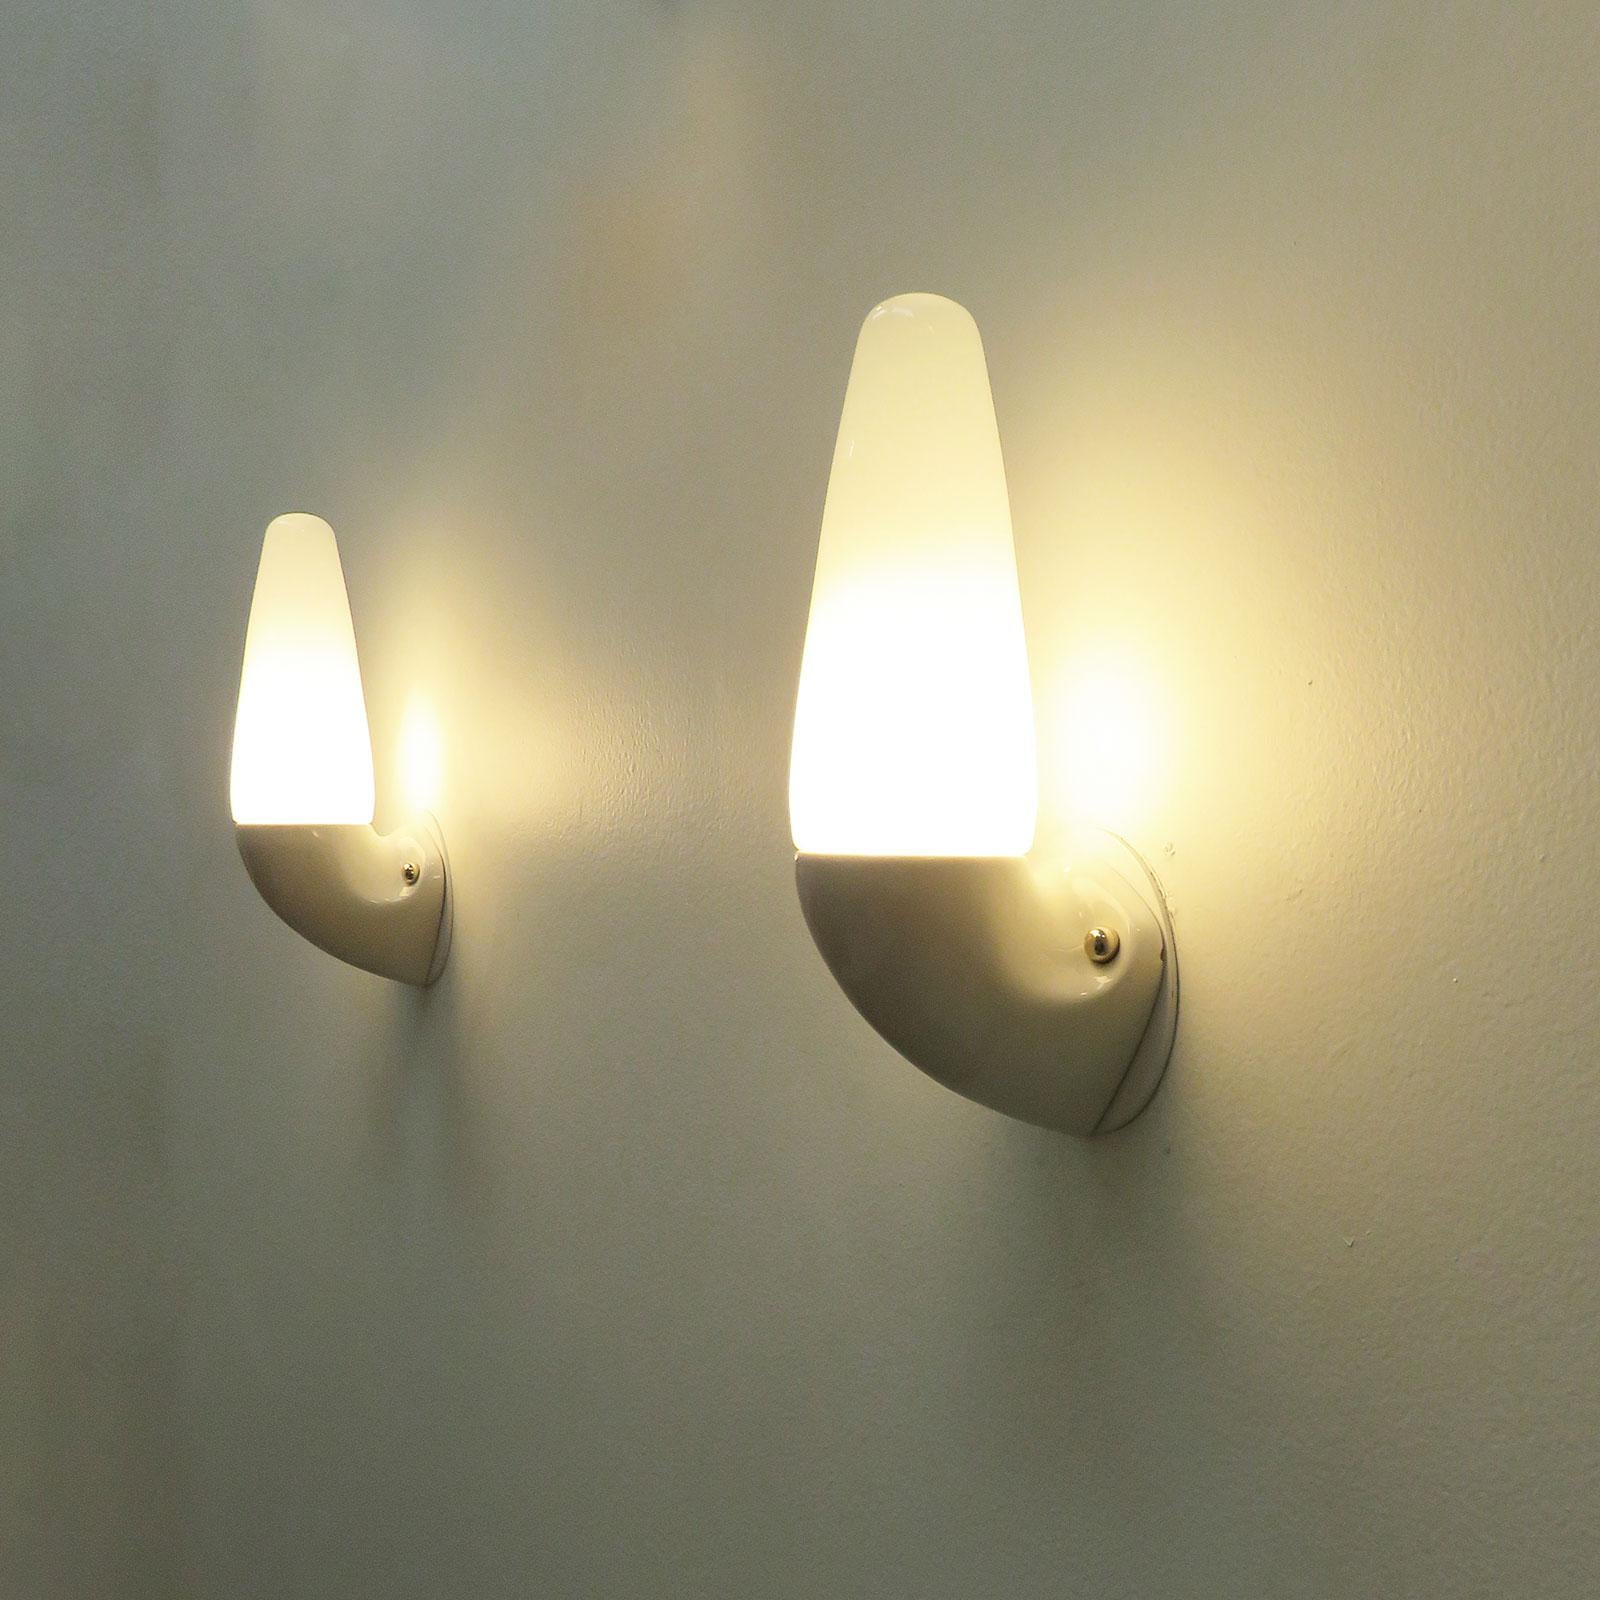 Pair of Ceramic Wall Lights by Sigvard Bernadotte For Sale 1